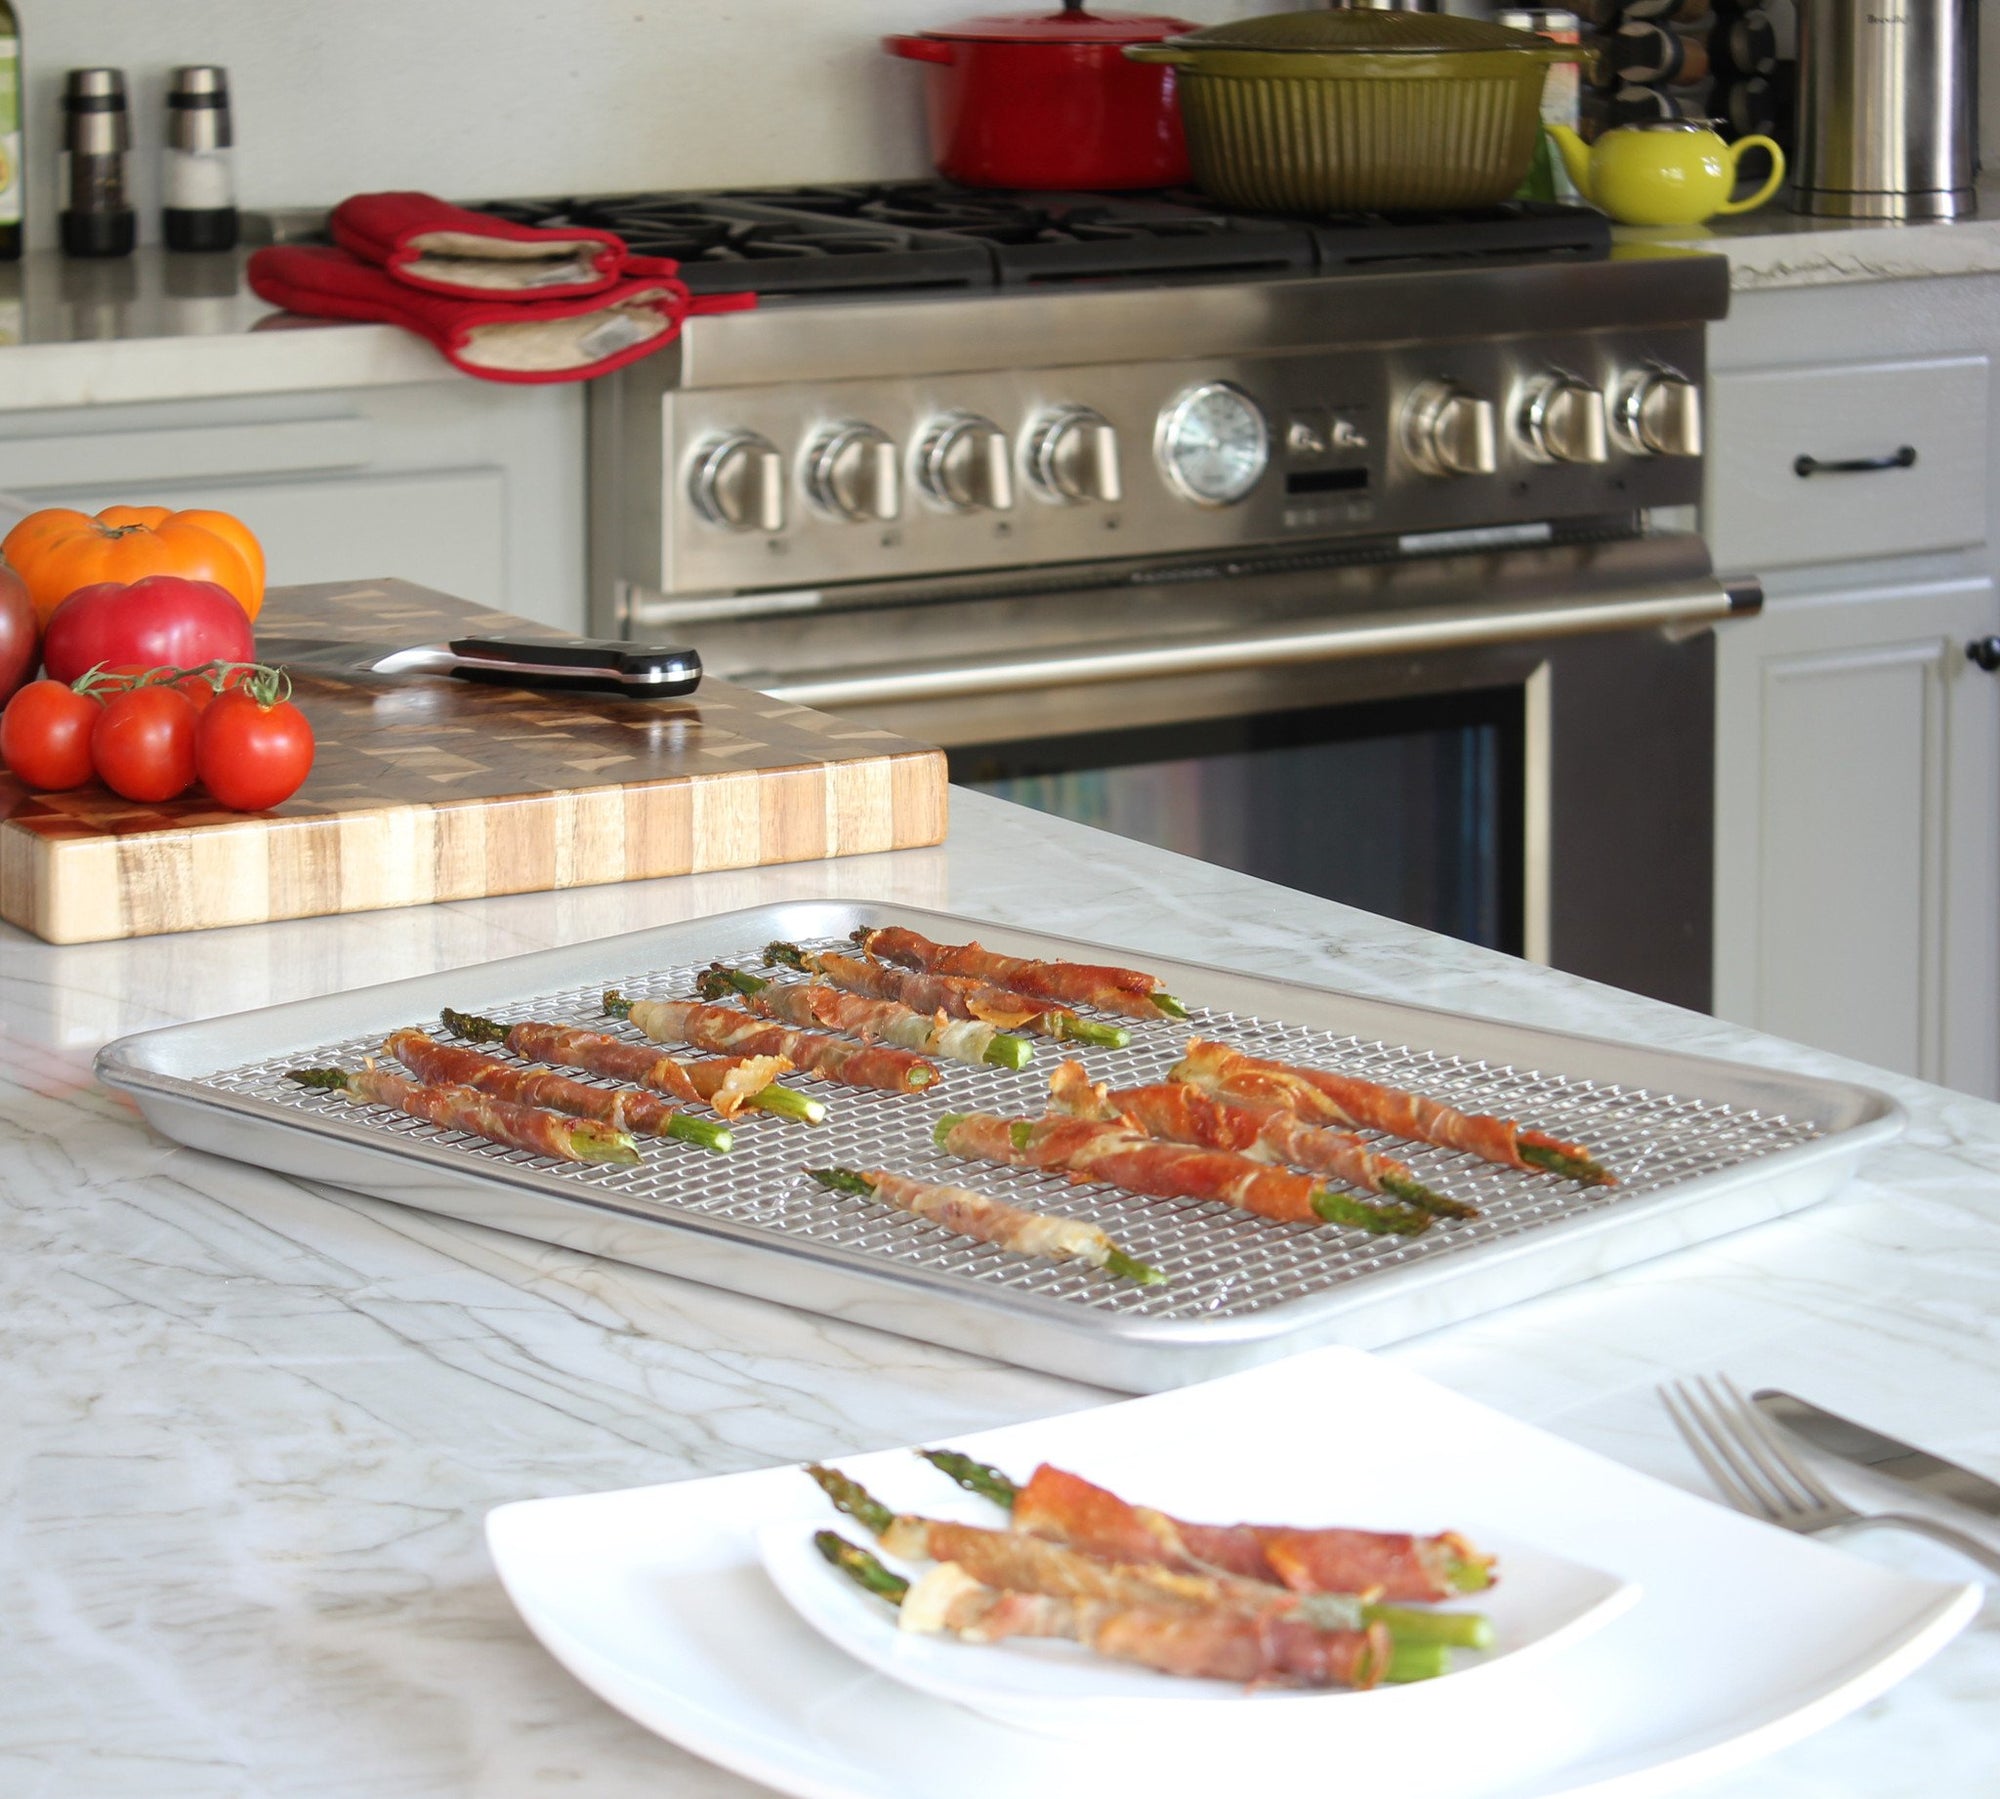 Stainless Steel Cooling Baking Rack